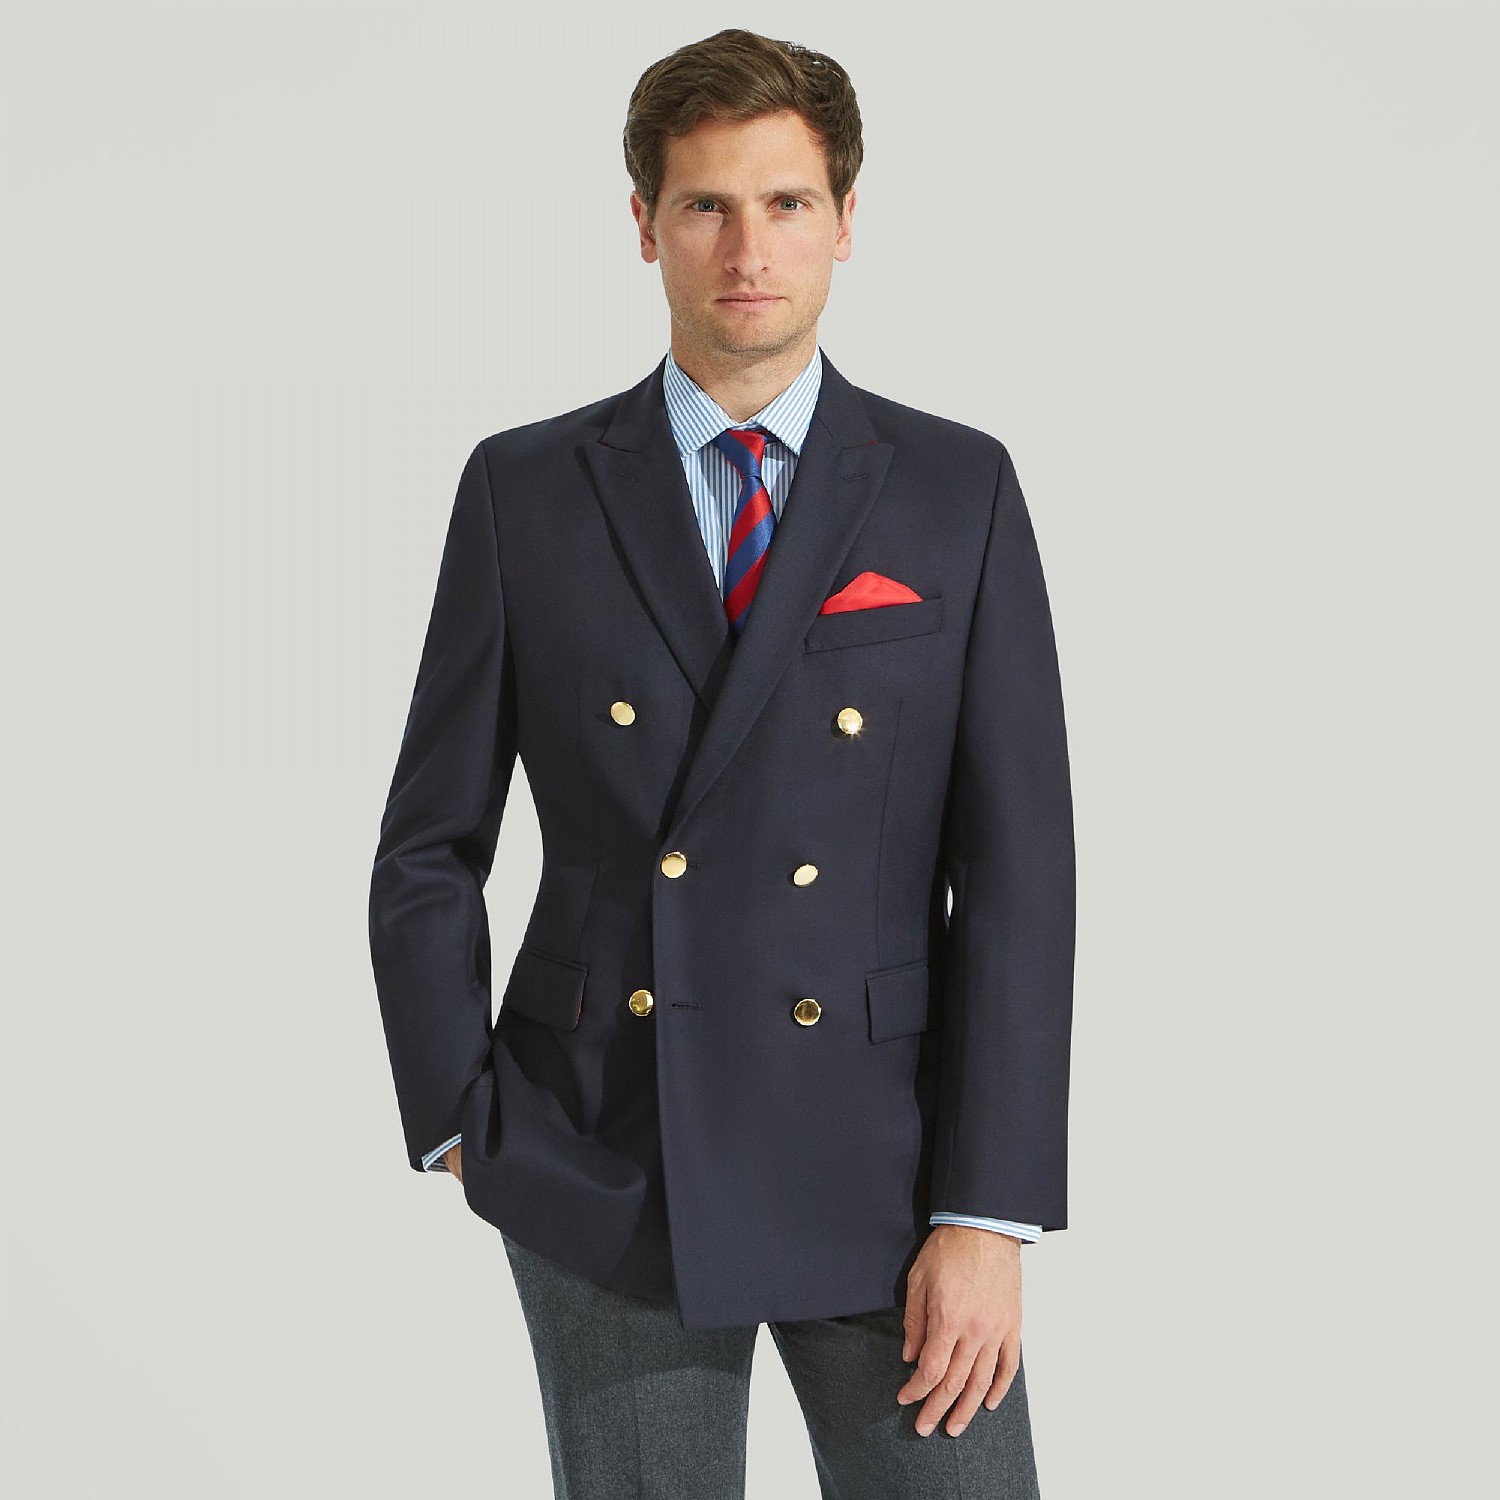 Men's Double Breasted Jacket in Navy